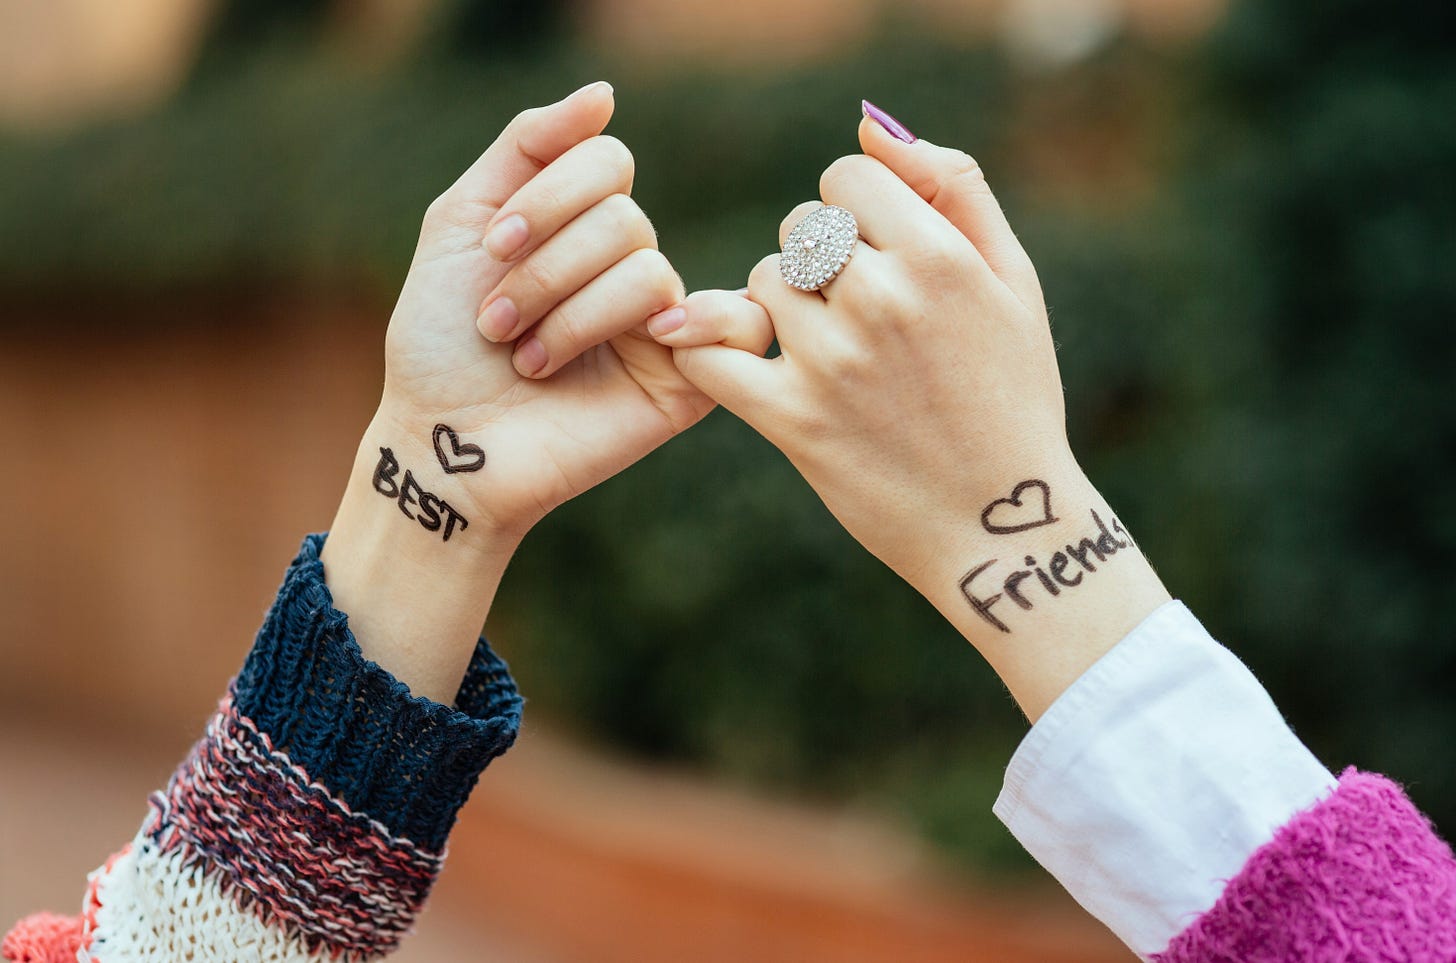 Two hands in pinky ring embrace with Best Friend written on their wrists.